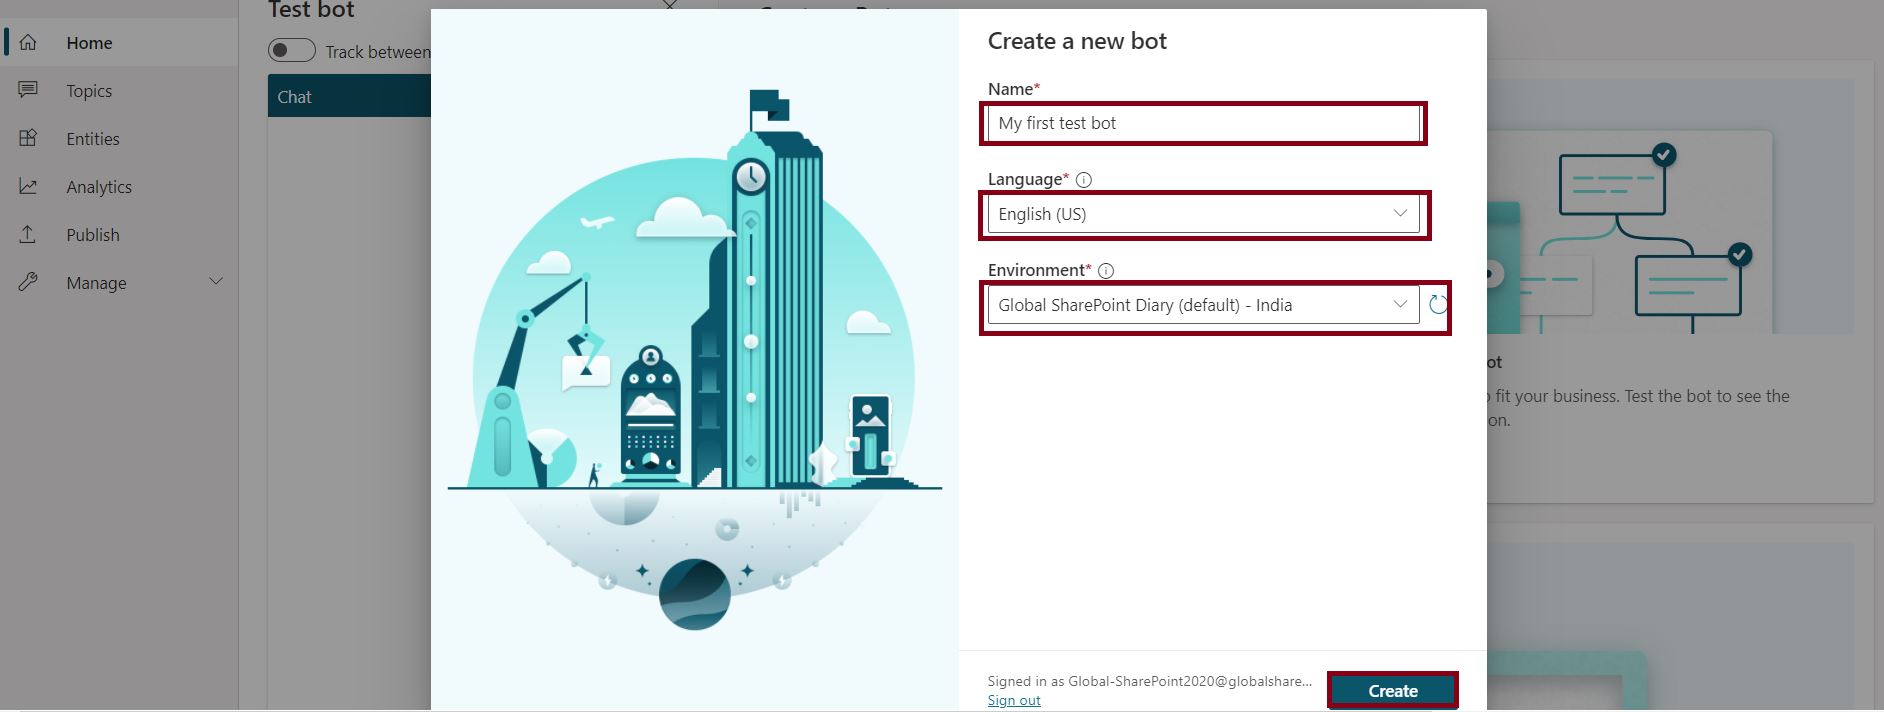 Create a new bot in Power Virtual Agents - PowerApps